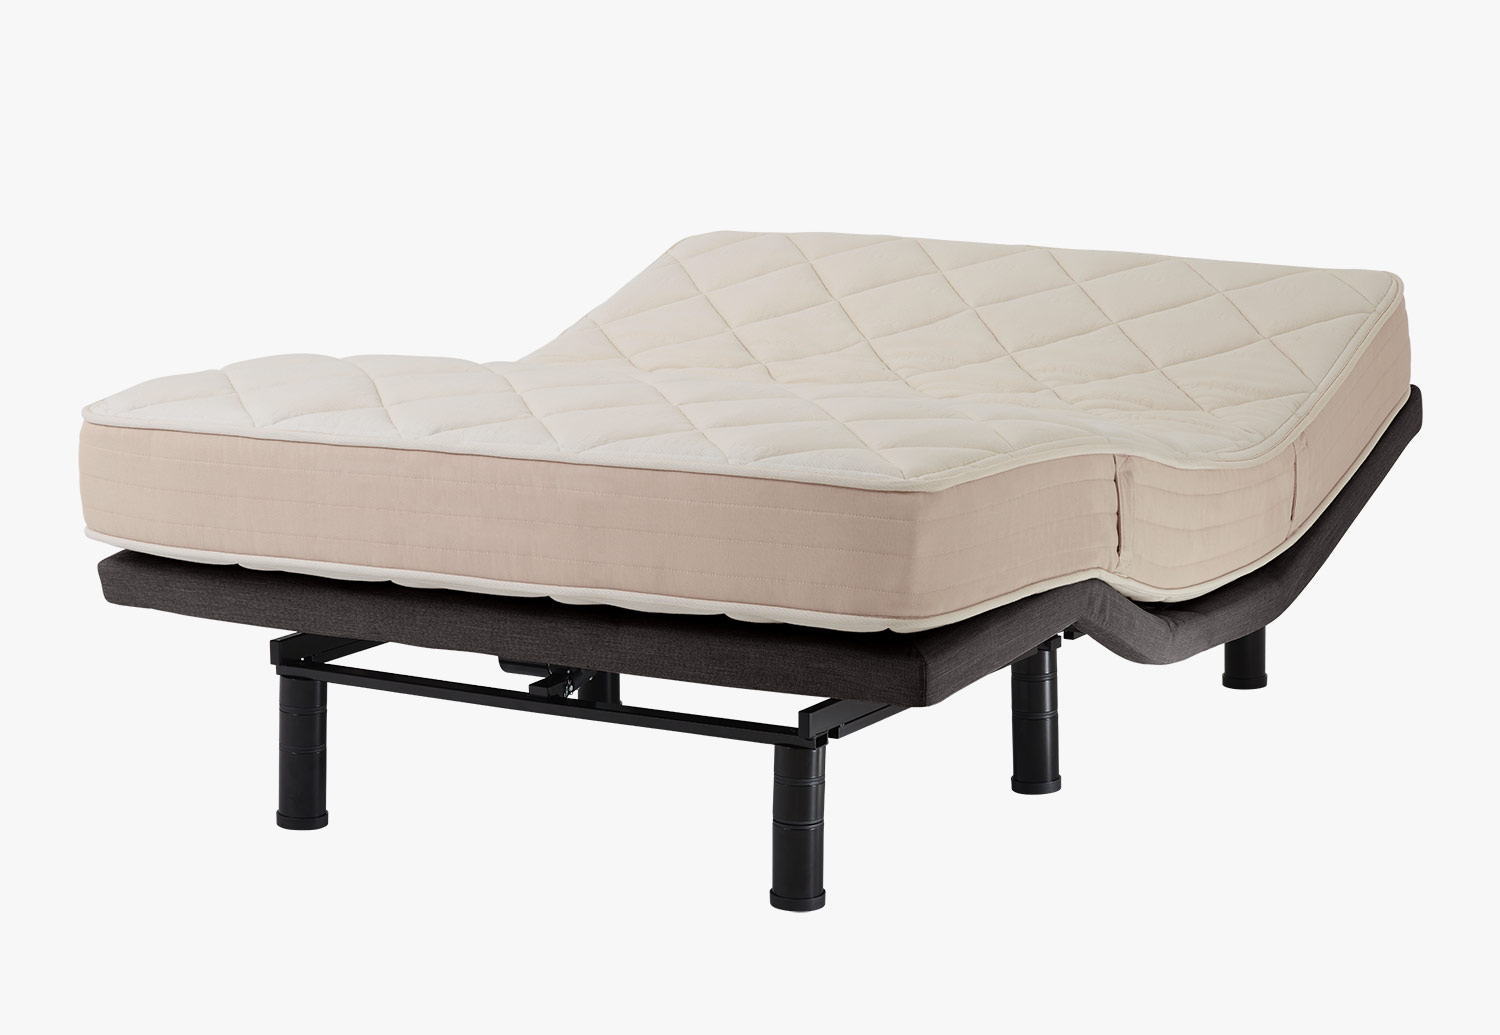 Custom Comfort A-300 – Premium Wireless Adjustable Bed with Massage a 300 adjustable bed 1